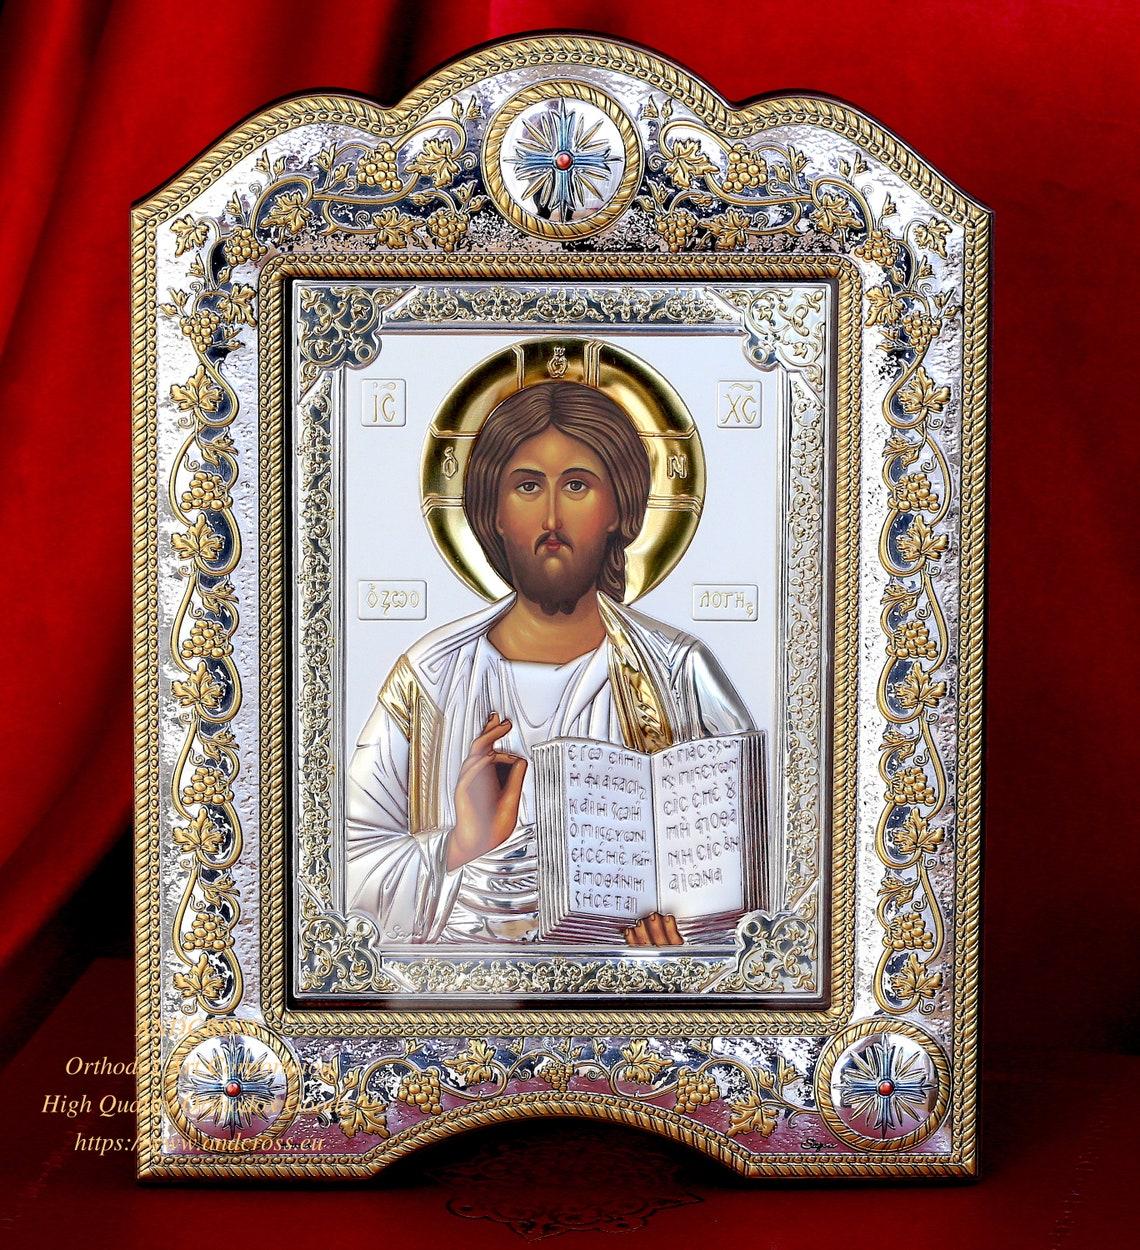 The Great Miraculous Christian Orthodox Silver icon- Christ Pantocrator 21×28 Gold and silver version/Frame with glass. B268|Import placeholder for 27214|Import placeholder for 27214|Import placeholder for 27214|Import placeholder for 27214|Import placeholder for 27214|Import placeholder for 27214